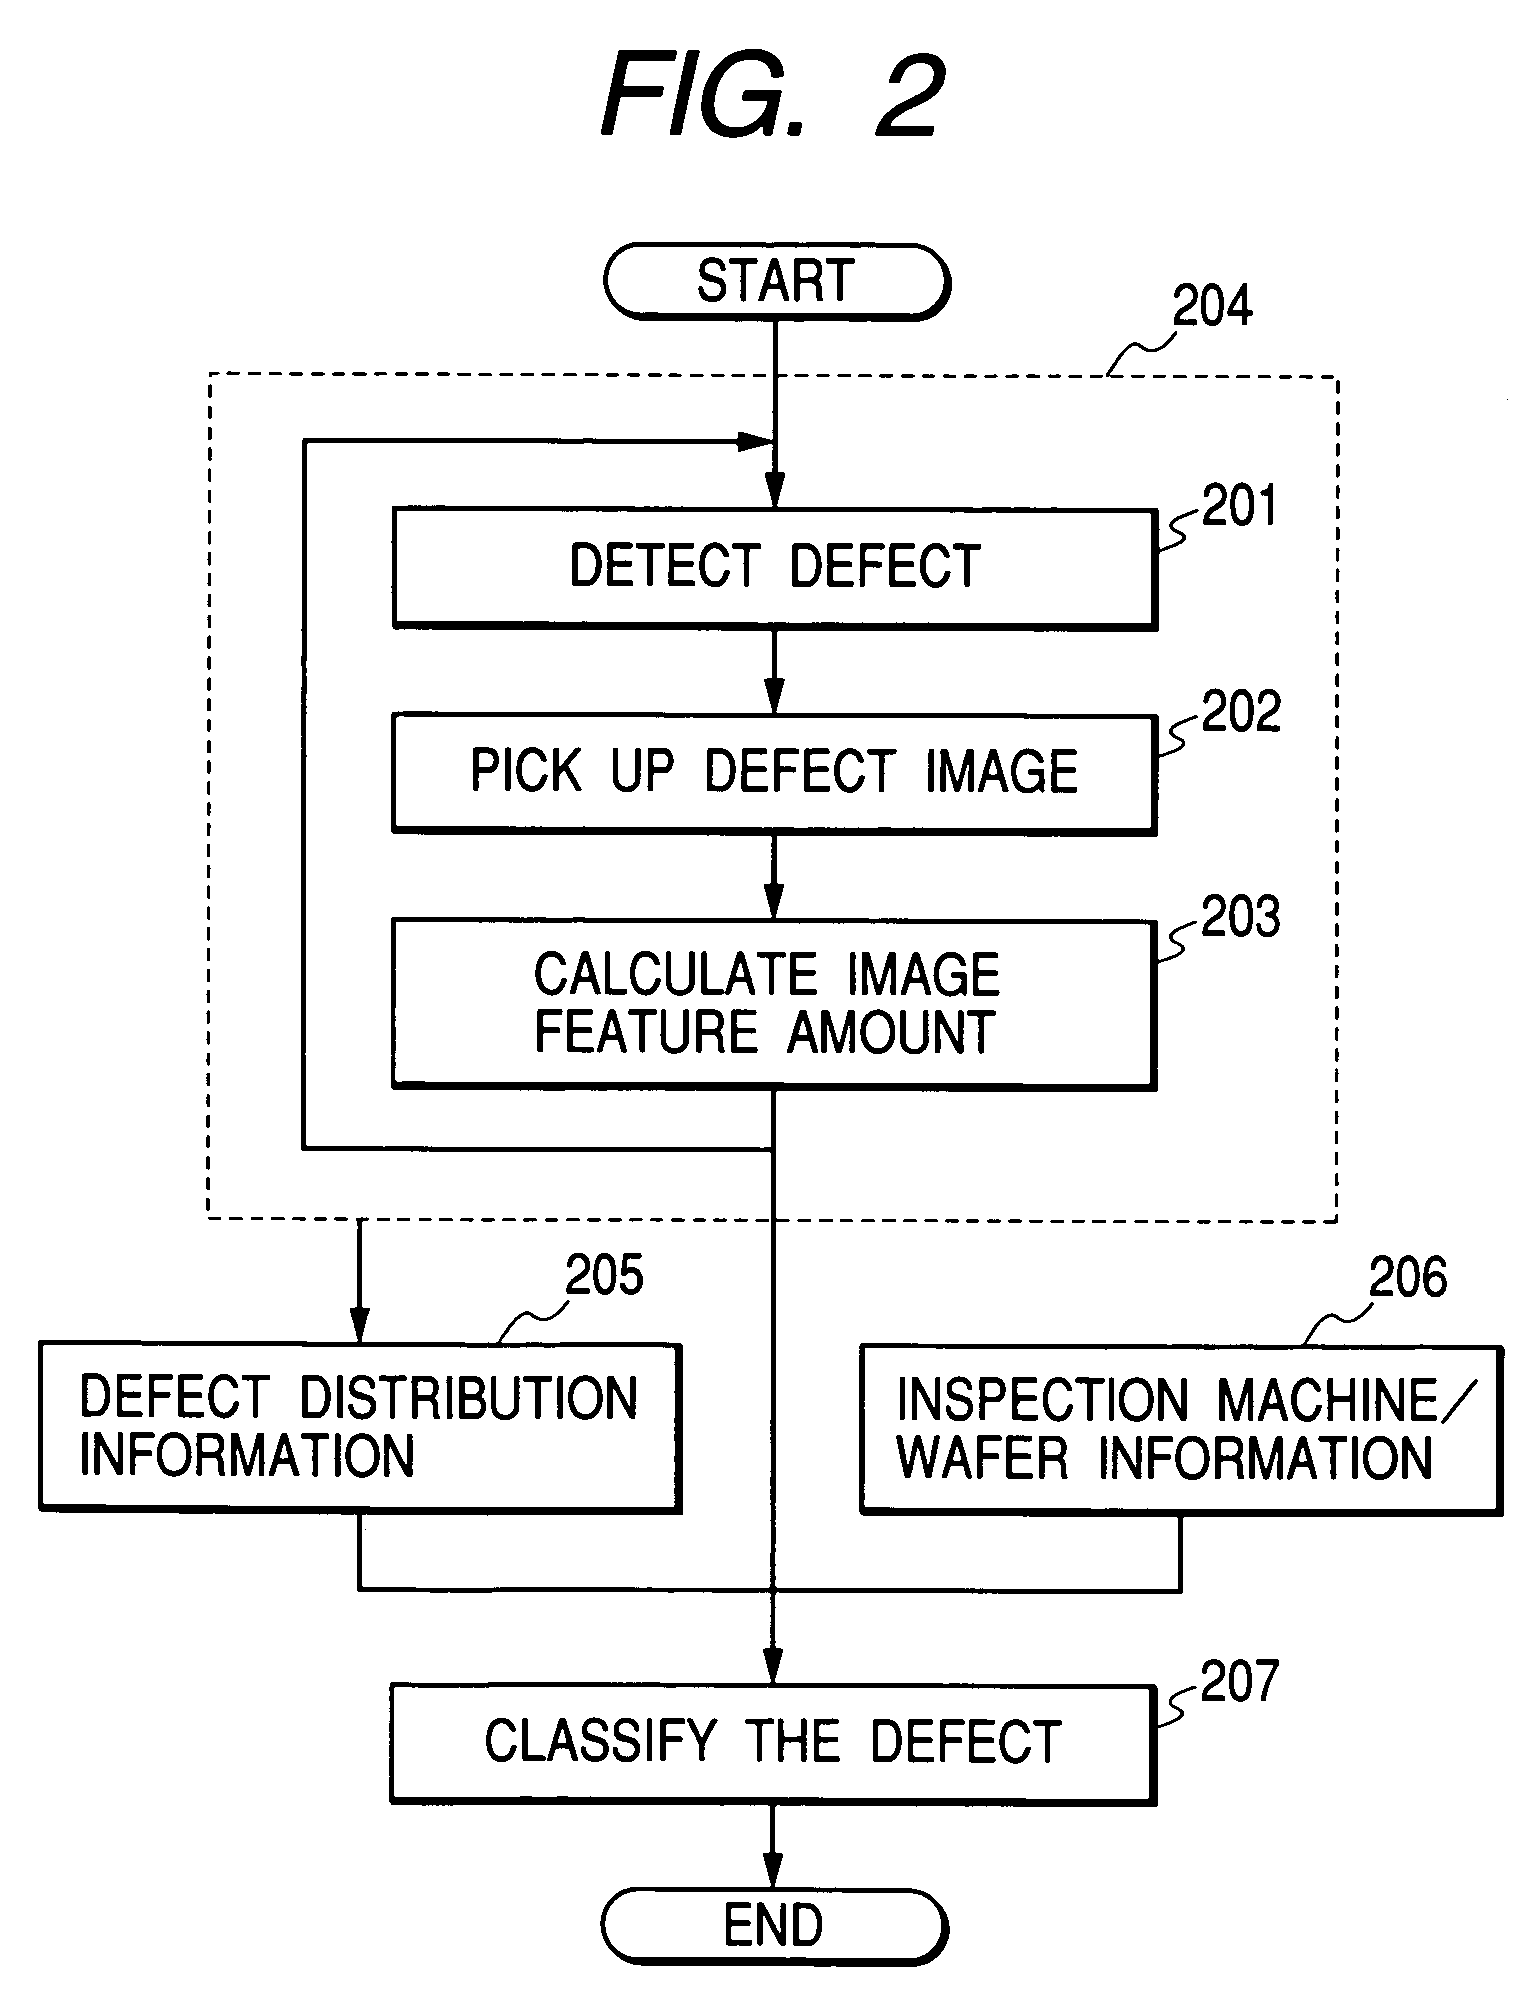 Method of classifying defects using multiple inspection machines